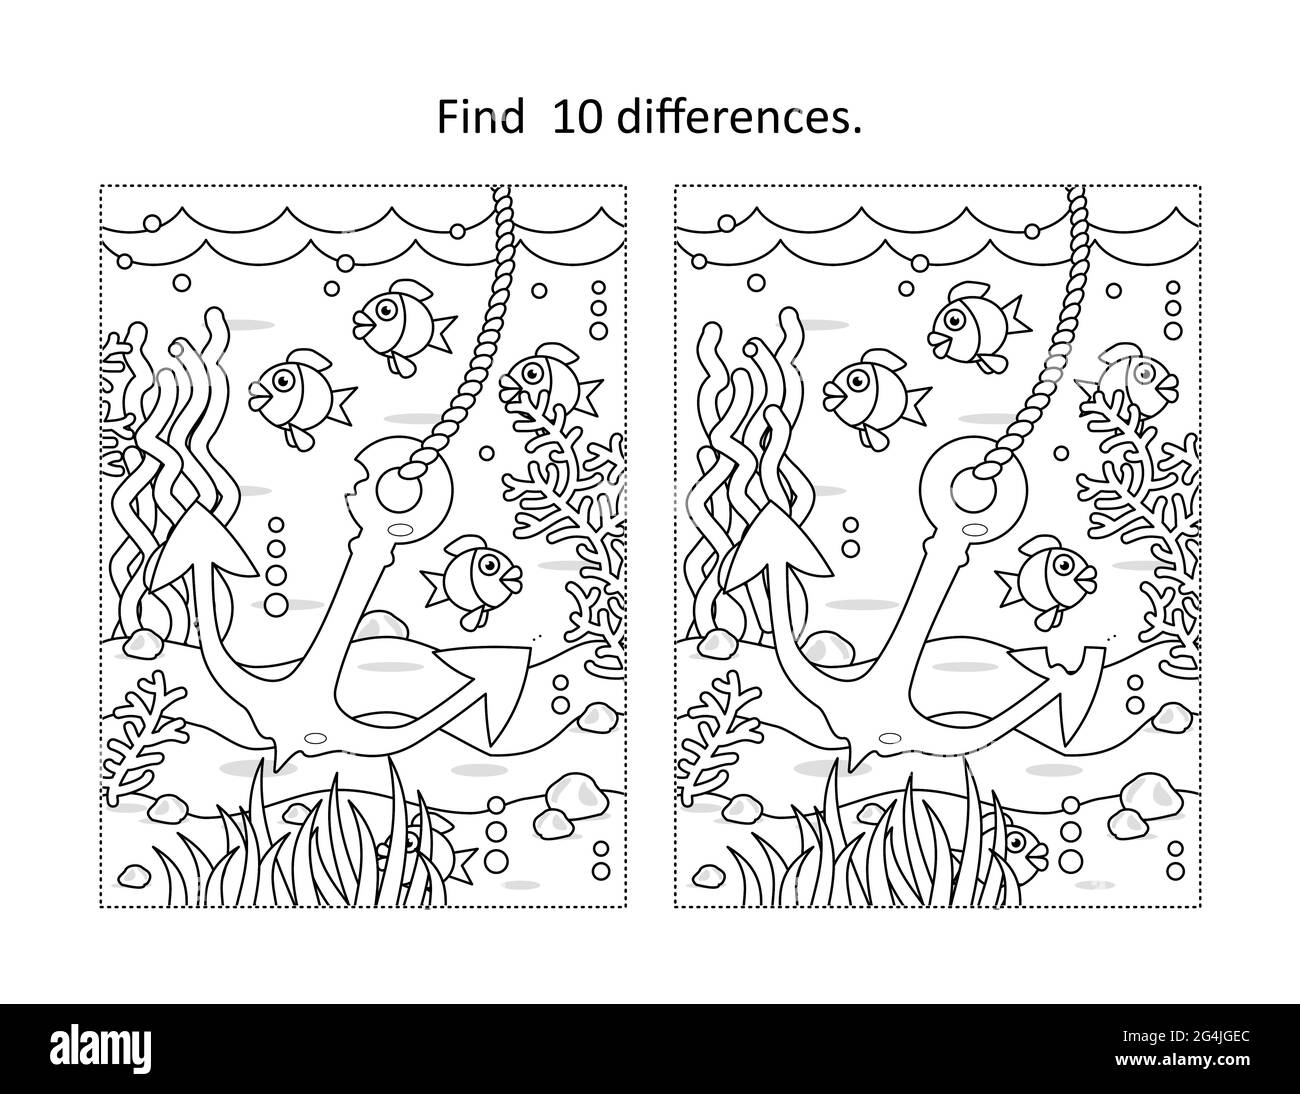 Find ten differences activity page with underwater life scene and anchor Stock Photo